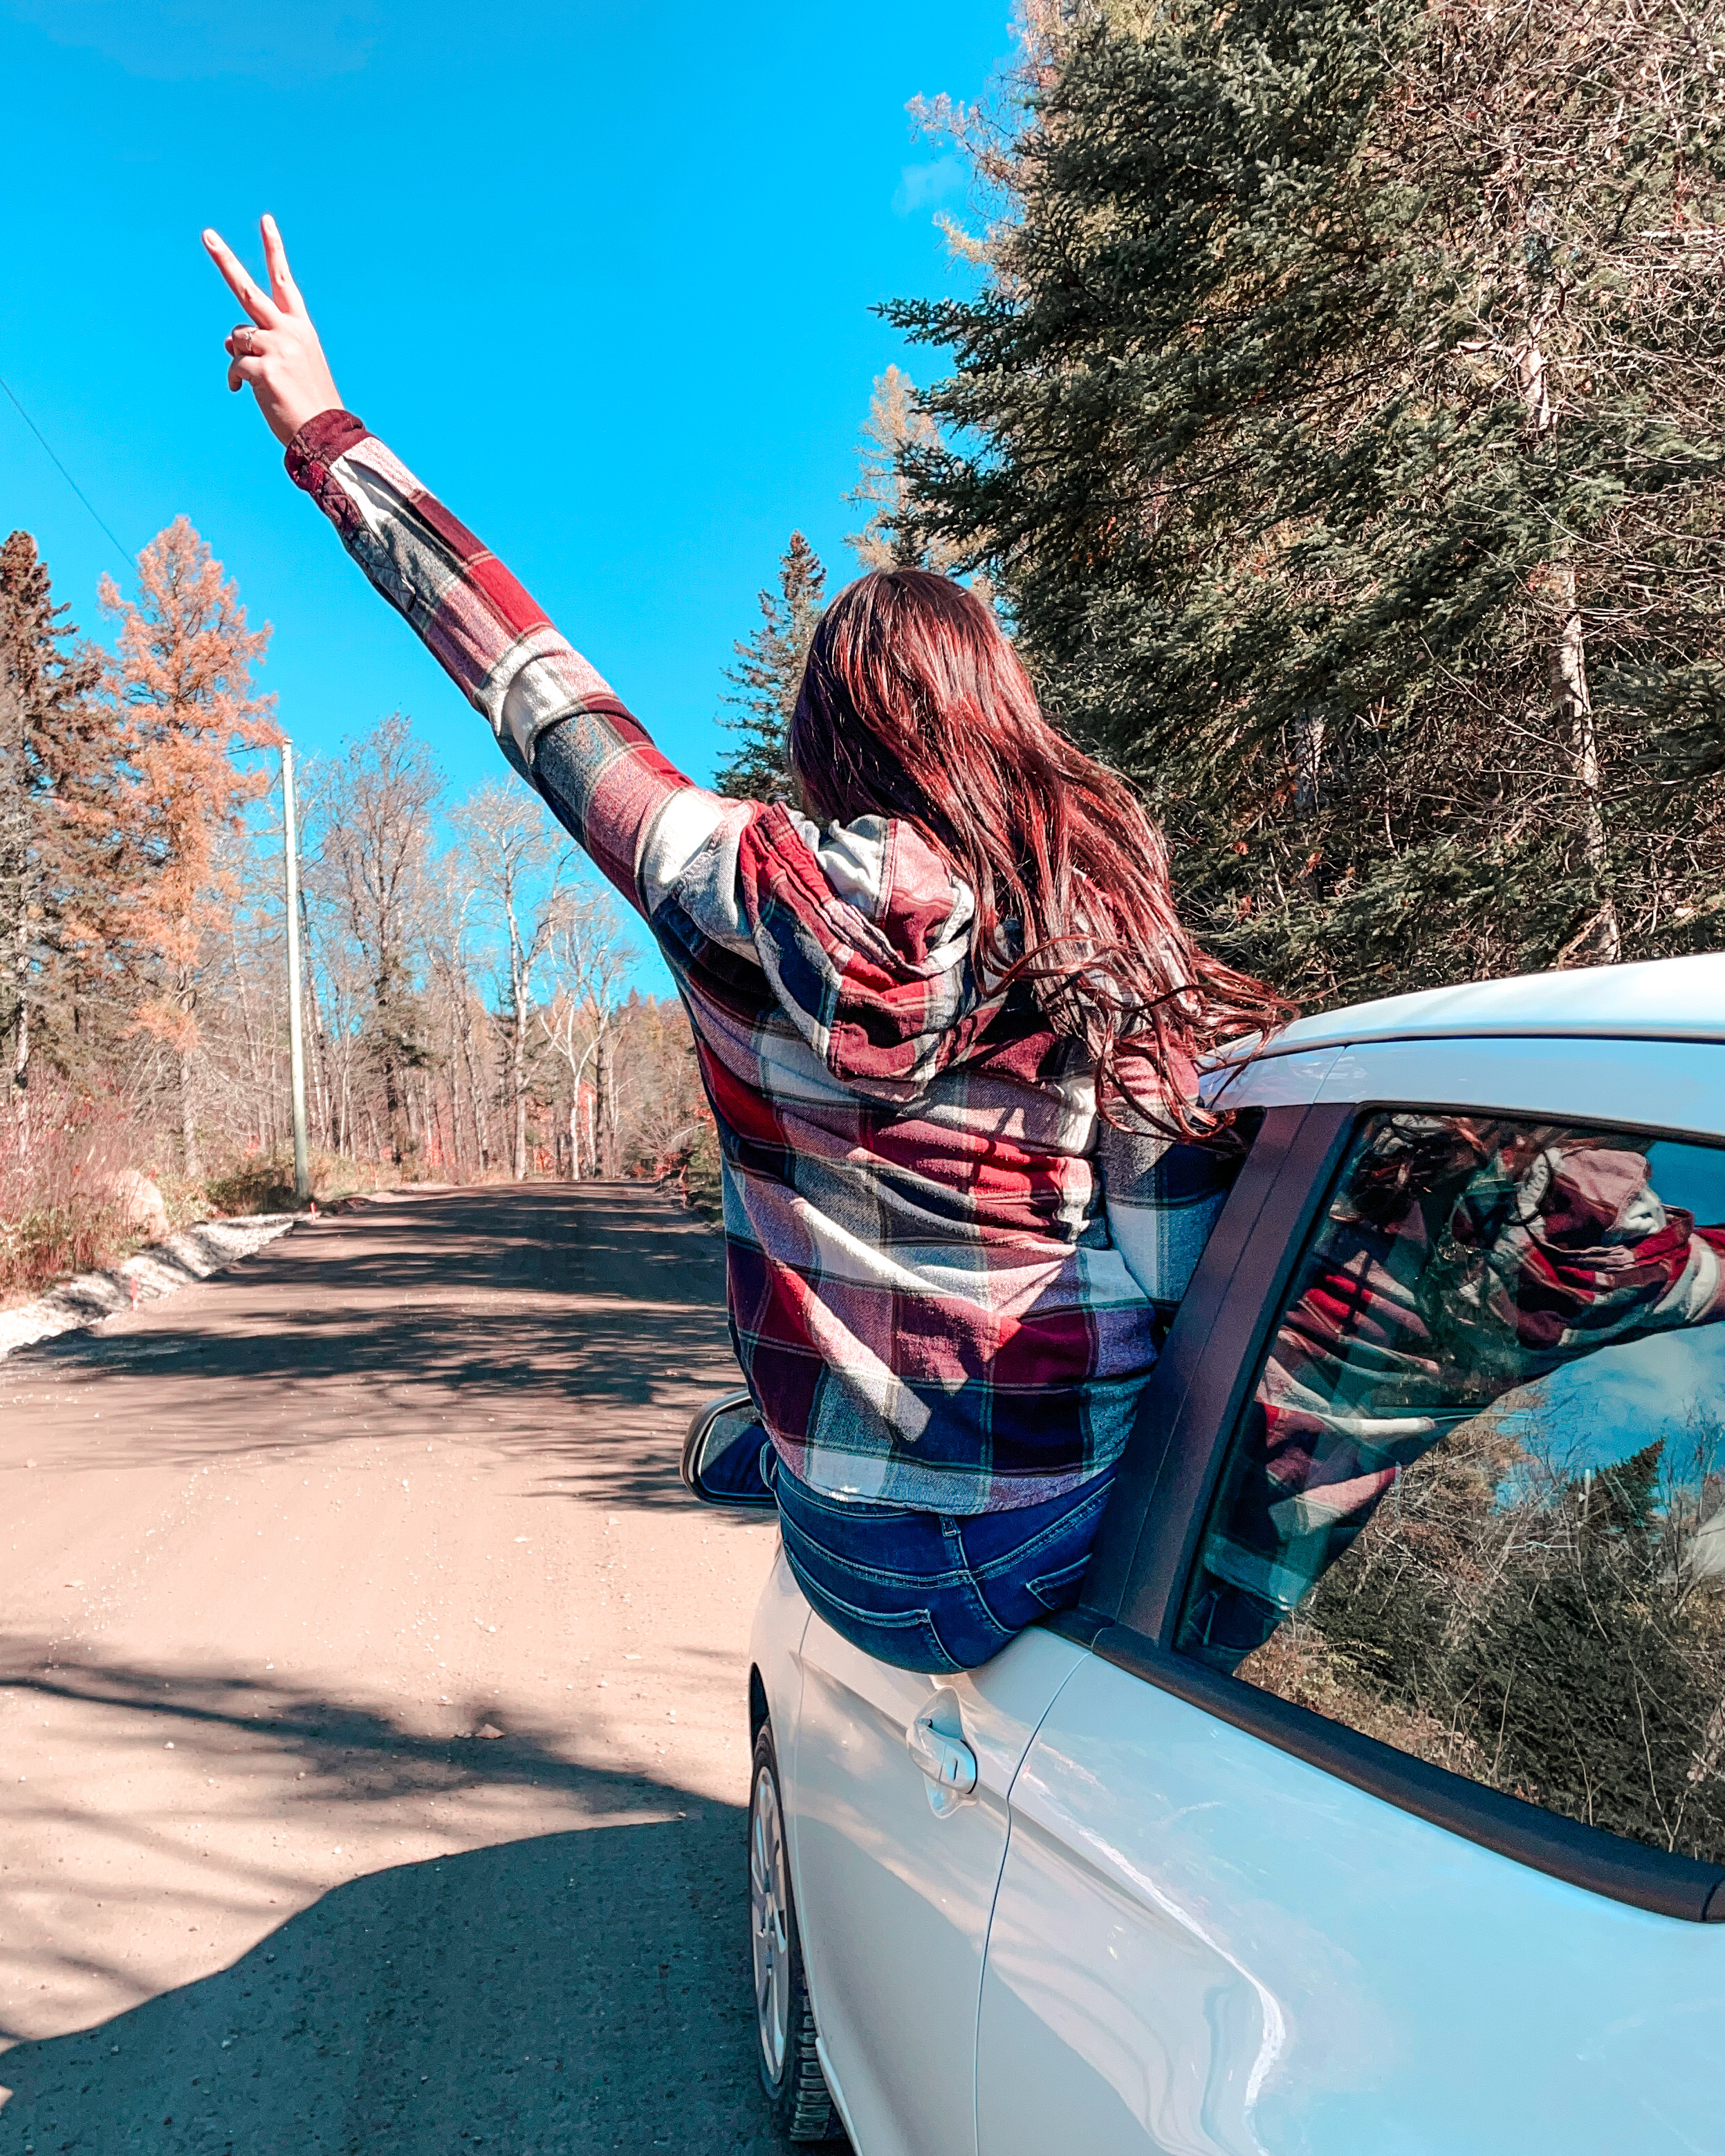 33 reasons why road trips are fun